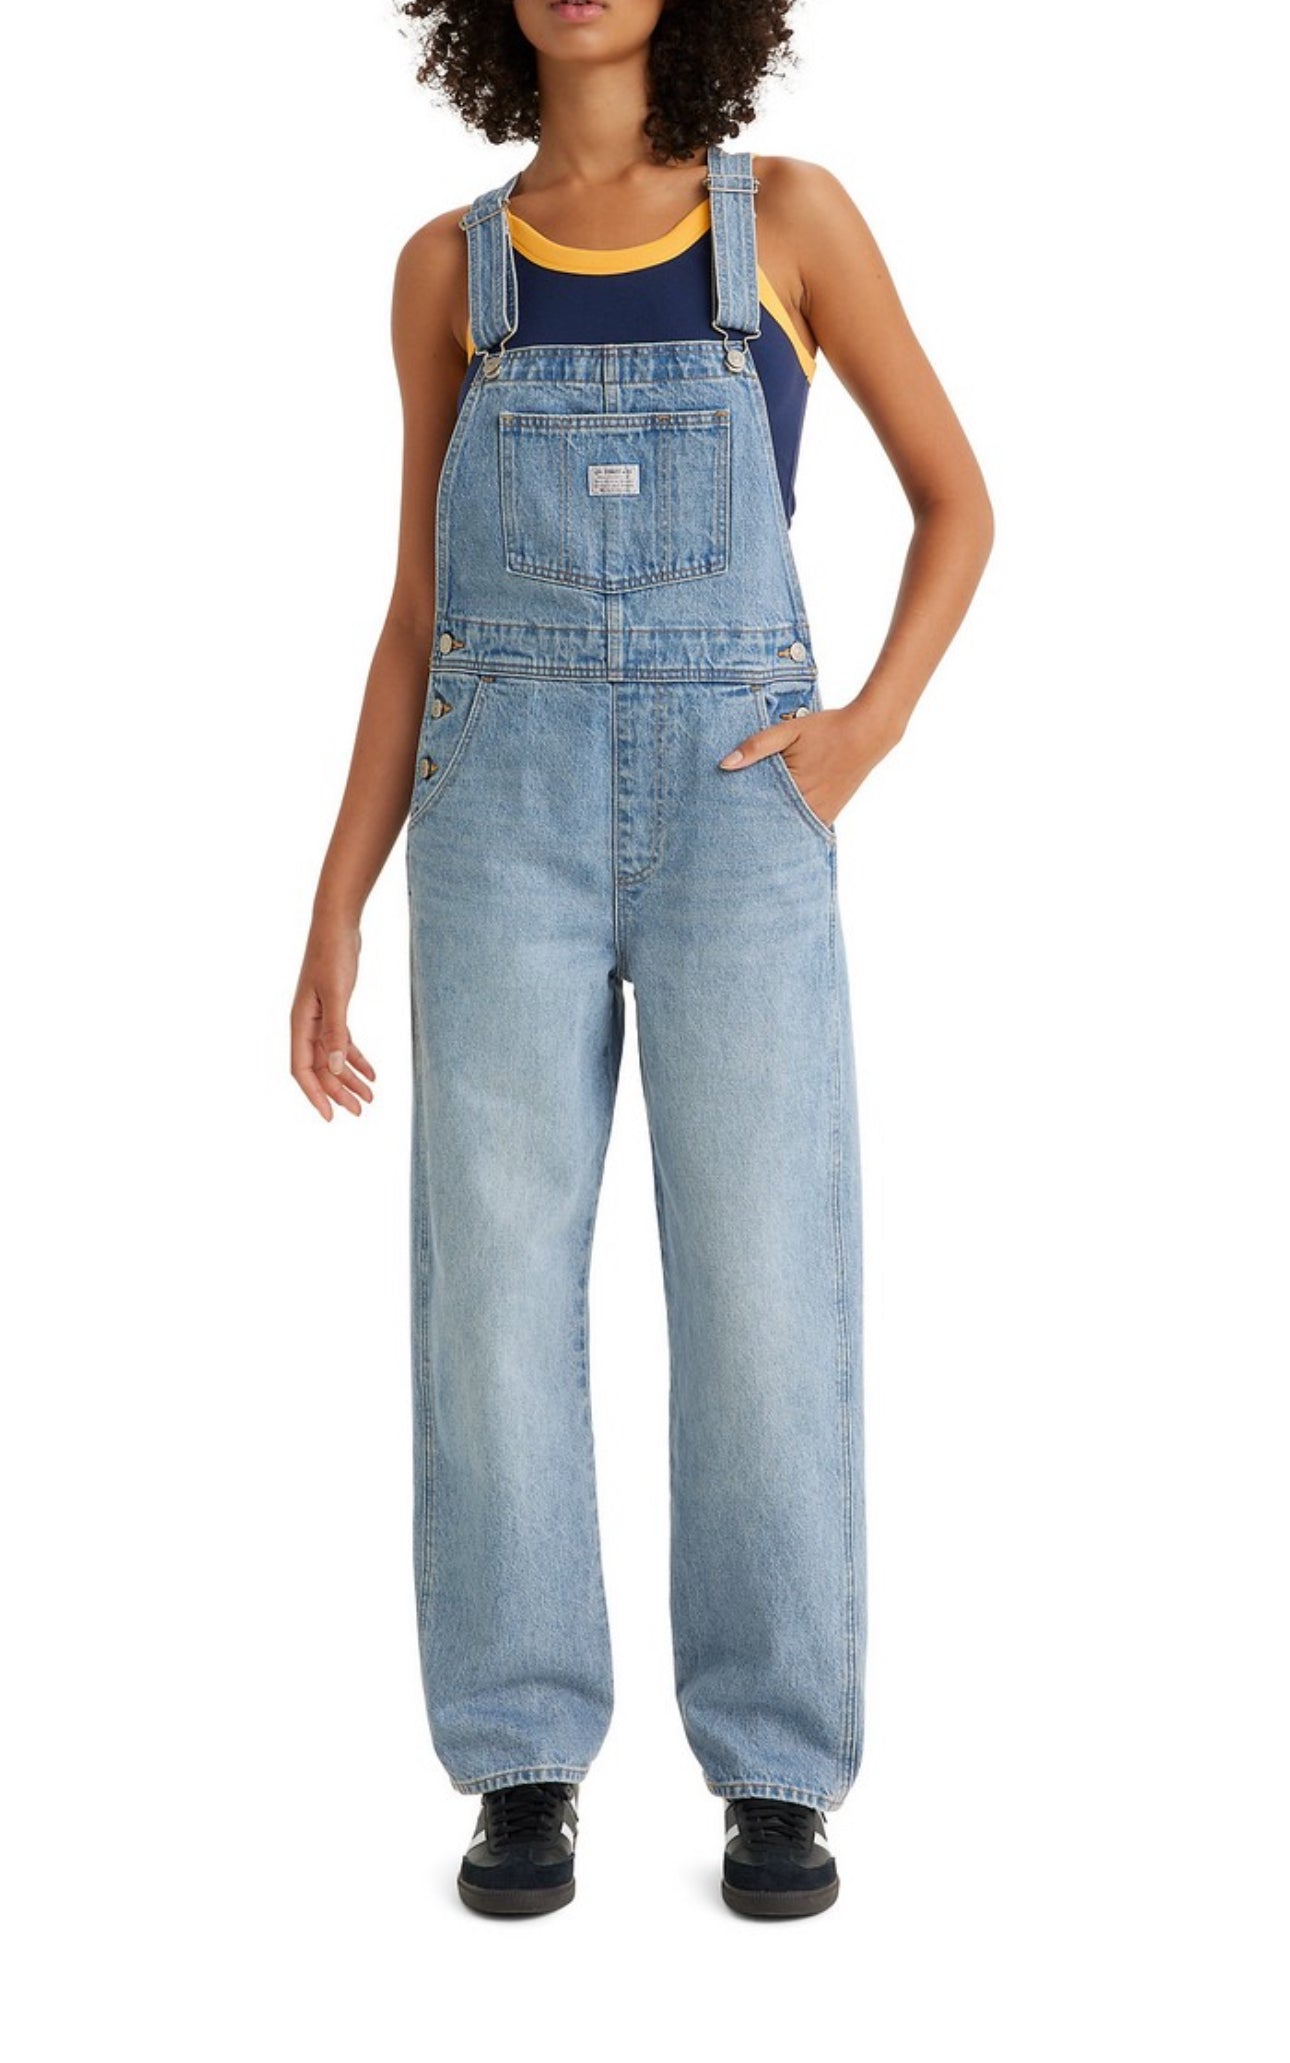 Vintage Overall | What A Delight